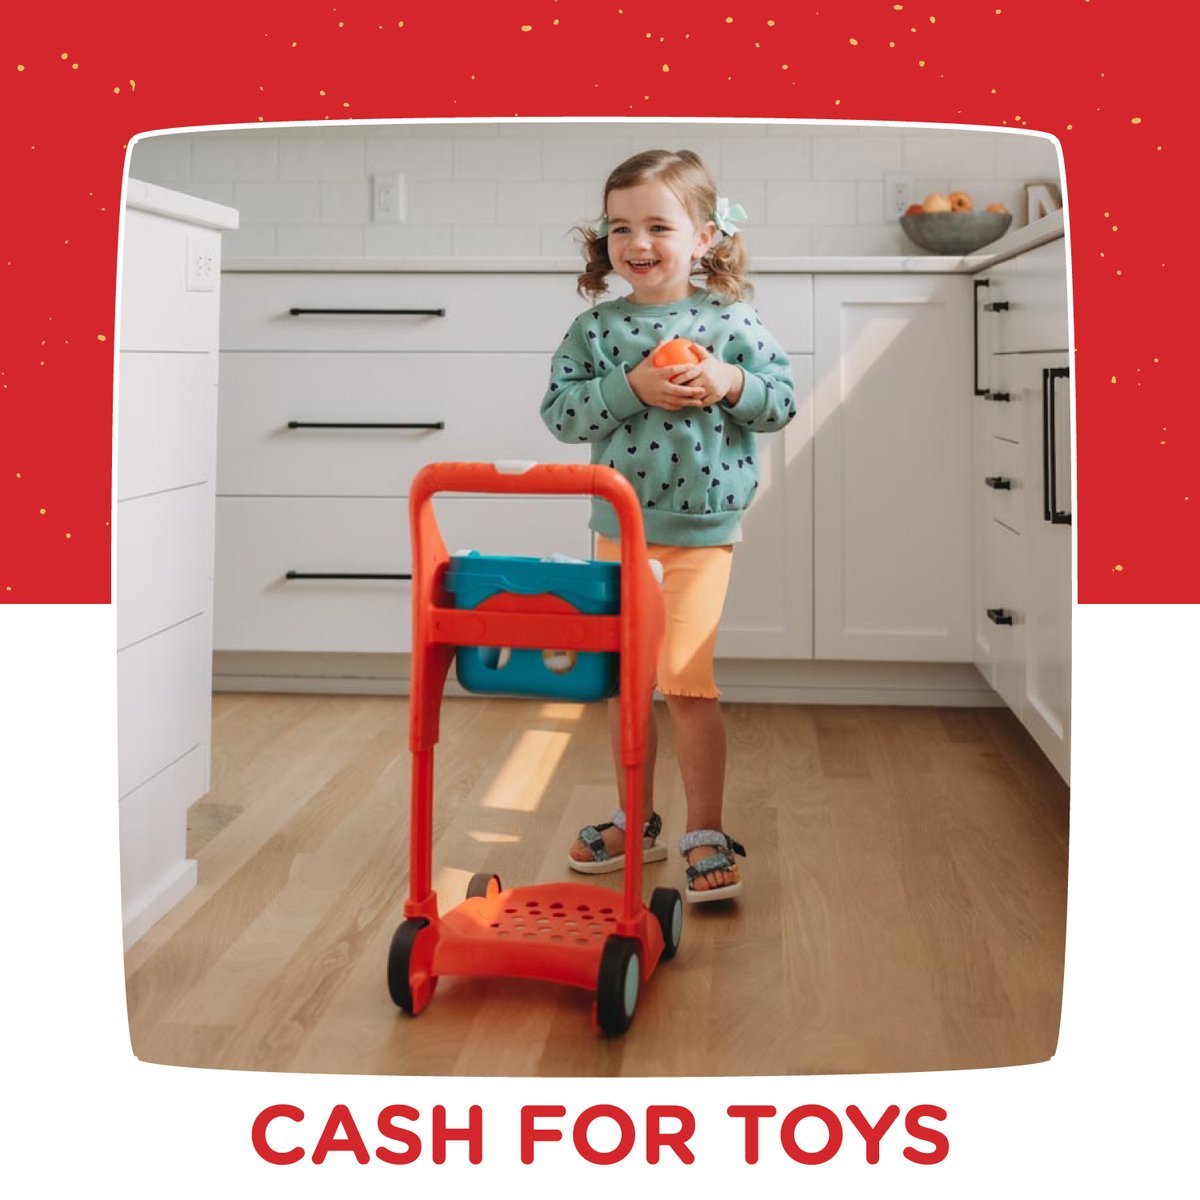 We buy a wide variety of kids' indoor and outdoor toys for all ages! Get paid cash for the gently used toys that you're ready to part with. #OnceUponAChild #CashForToys